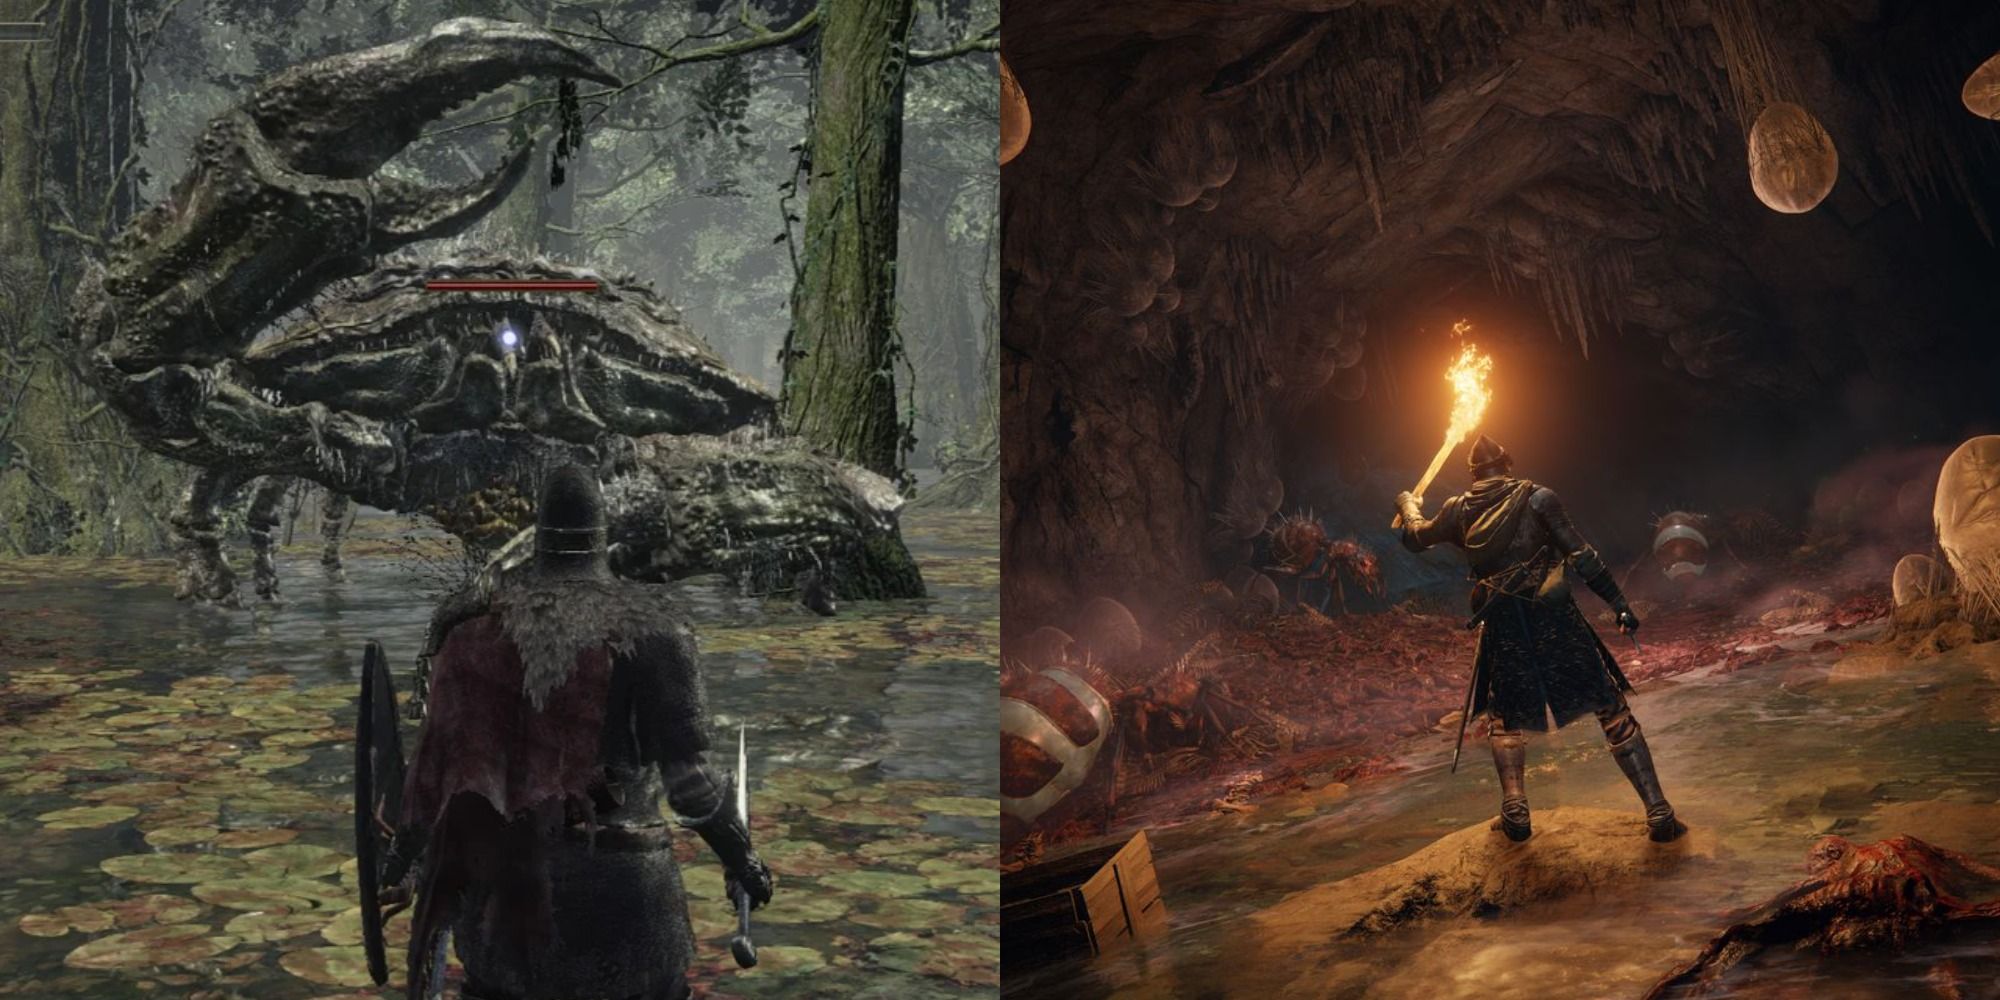 Split image showing a giant crab and a character in a swamp in Elden Ring